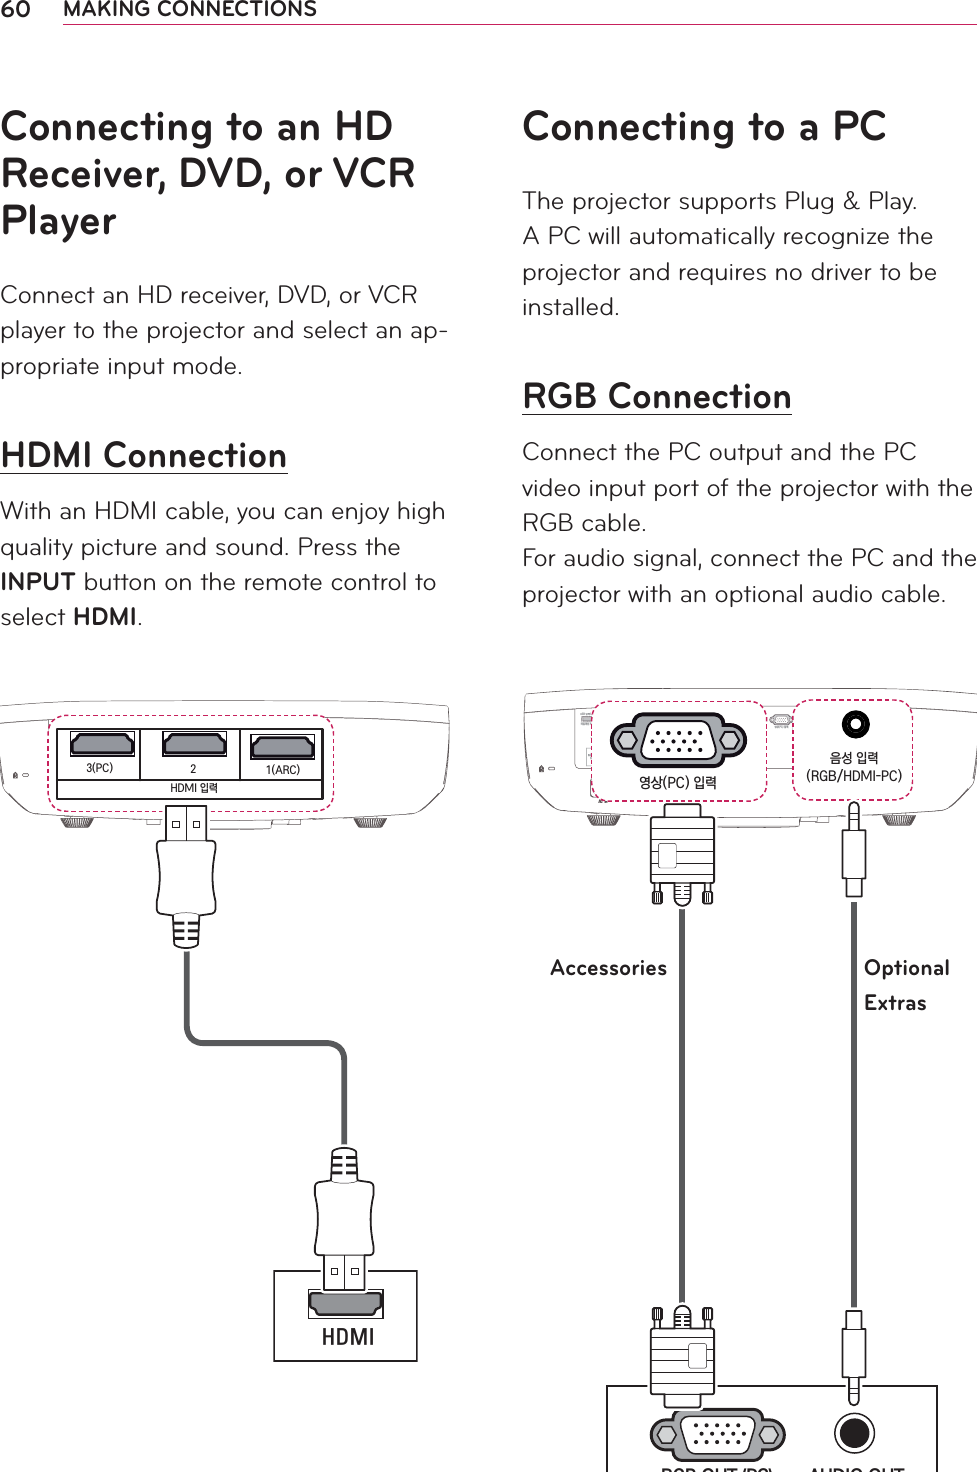 60 MAKING CONNECTIONSConnecting to an HD Receiver, DVD, or VCR PlayerConnect an HD receiver, DVD, or VCR player to the projector and select an ap-propriate input mode.HDMI ConnectionWith an HDMI cable, you can enjoy high quality picture and sound. Press the INPUT button on the remote control to select HDMI. USB 입력1타임머신 Ready안테나/케이블 입력3(PC)21(ARC)HDMI 입력영상(PC) 입력음성 입력(RGB/HDMI-PC)LANTRIGGER(12V)이어폰서비스 전용컴포넌트입력광디지털음성출력외부입력영상좌(모노)-음성-우좌우영상음성+&apos;0,3(PC) 21(ARC)HDMI 입력Connecting to a PCThe projector supports Plug &amp; Play. A PC will automatically recognize the projector and requires no driver to be installed.RGB ConnectionConnect the PC output and the PC video input port of the projector with the RGB cable.  For audio signal, connect the PC and the projector with an optional audio cable.  USB 입력1타임머신 Ready안테나/케이블 입력 3(PC)21(ARC)HDMI 입력영상(PC) 입력 음성 입력(RGB/HDMI-PC)LANTRIGGER(12V)이어폰서비스 전용컴포넌트 입력광디지털음성출력외부 입력영상좌(모노)-음성-우좌우영상음성AUDIO OUTRGB OUT (PC)음성 입력(RGB/HDMI-PC)영상(PC) 입력(RAccessories Optional Extras